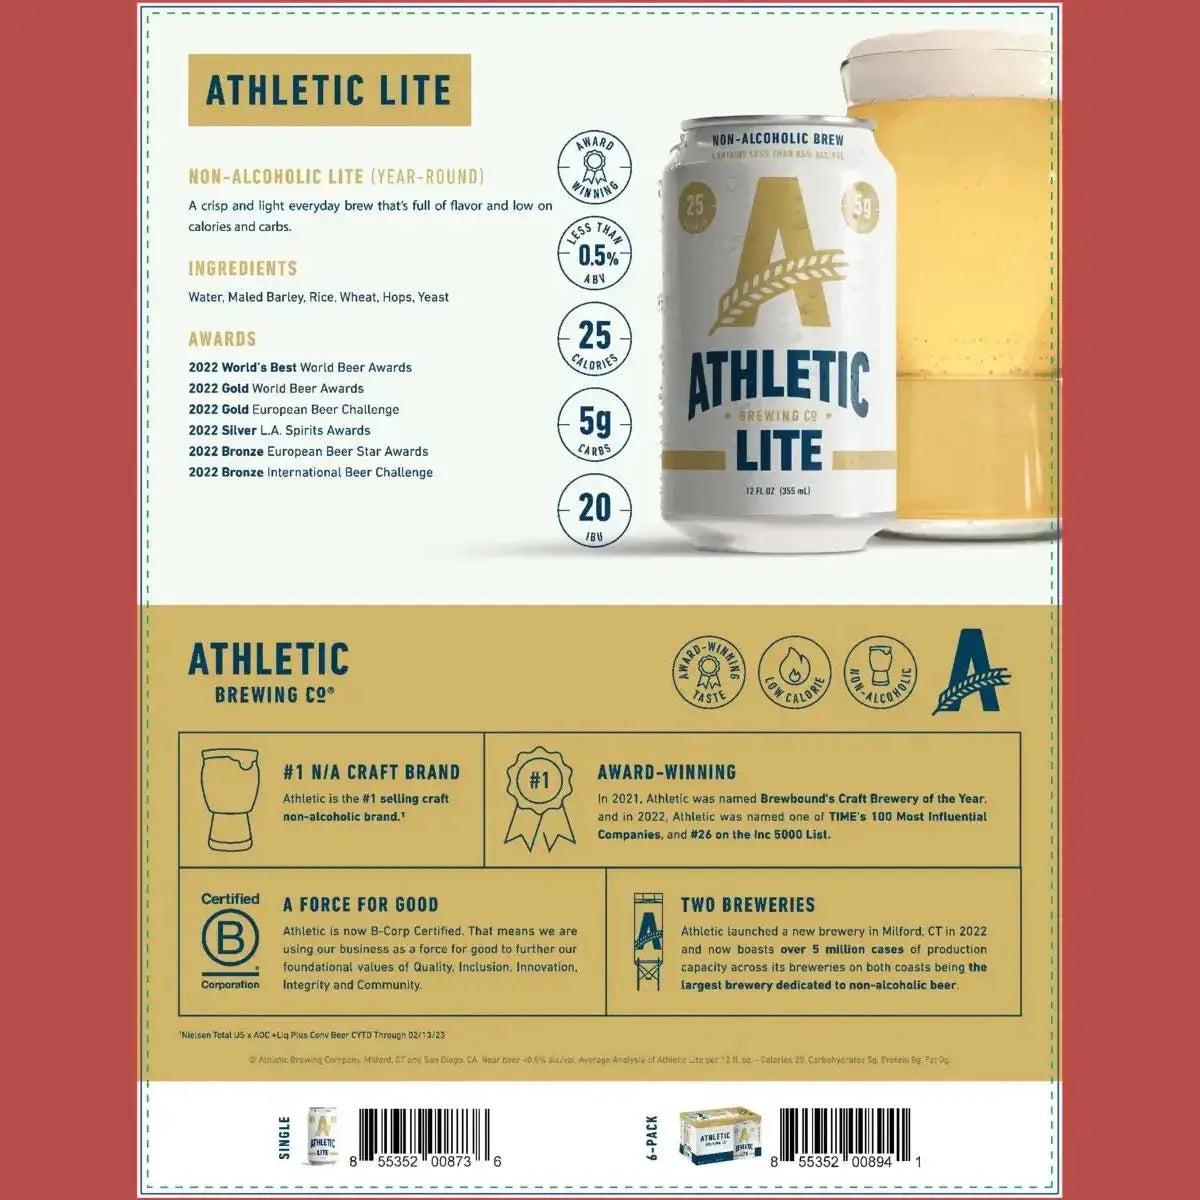 ATHLETIC LITE-NON-ALCOHOLIC BEER